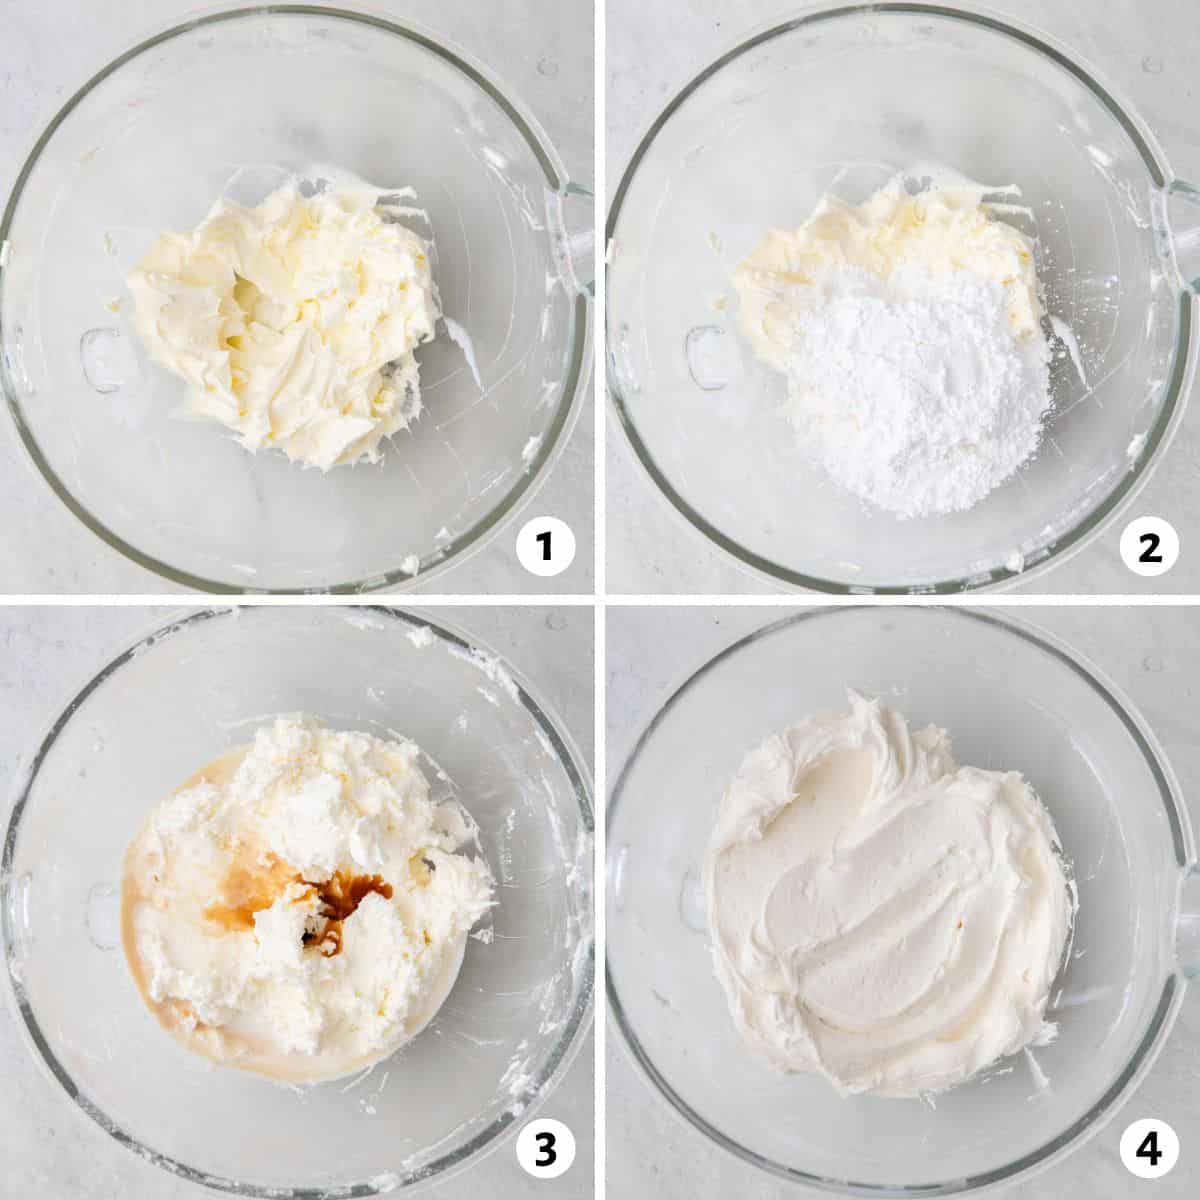 4 image collage making recipe in bowl of stand mixer: 1- cream butter, 2- add sugar, 3- add vanilla and milk, and 4- creamy frosting.